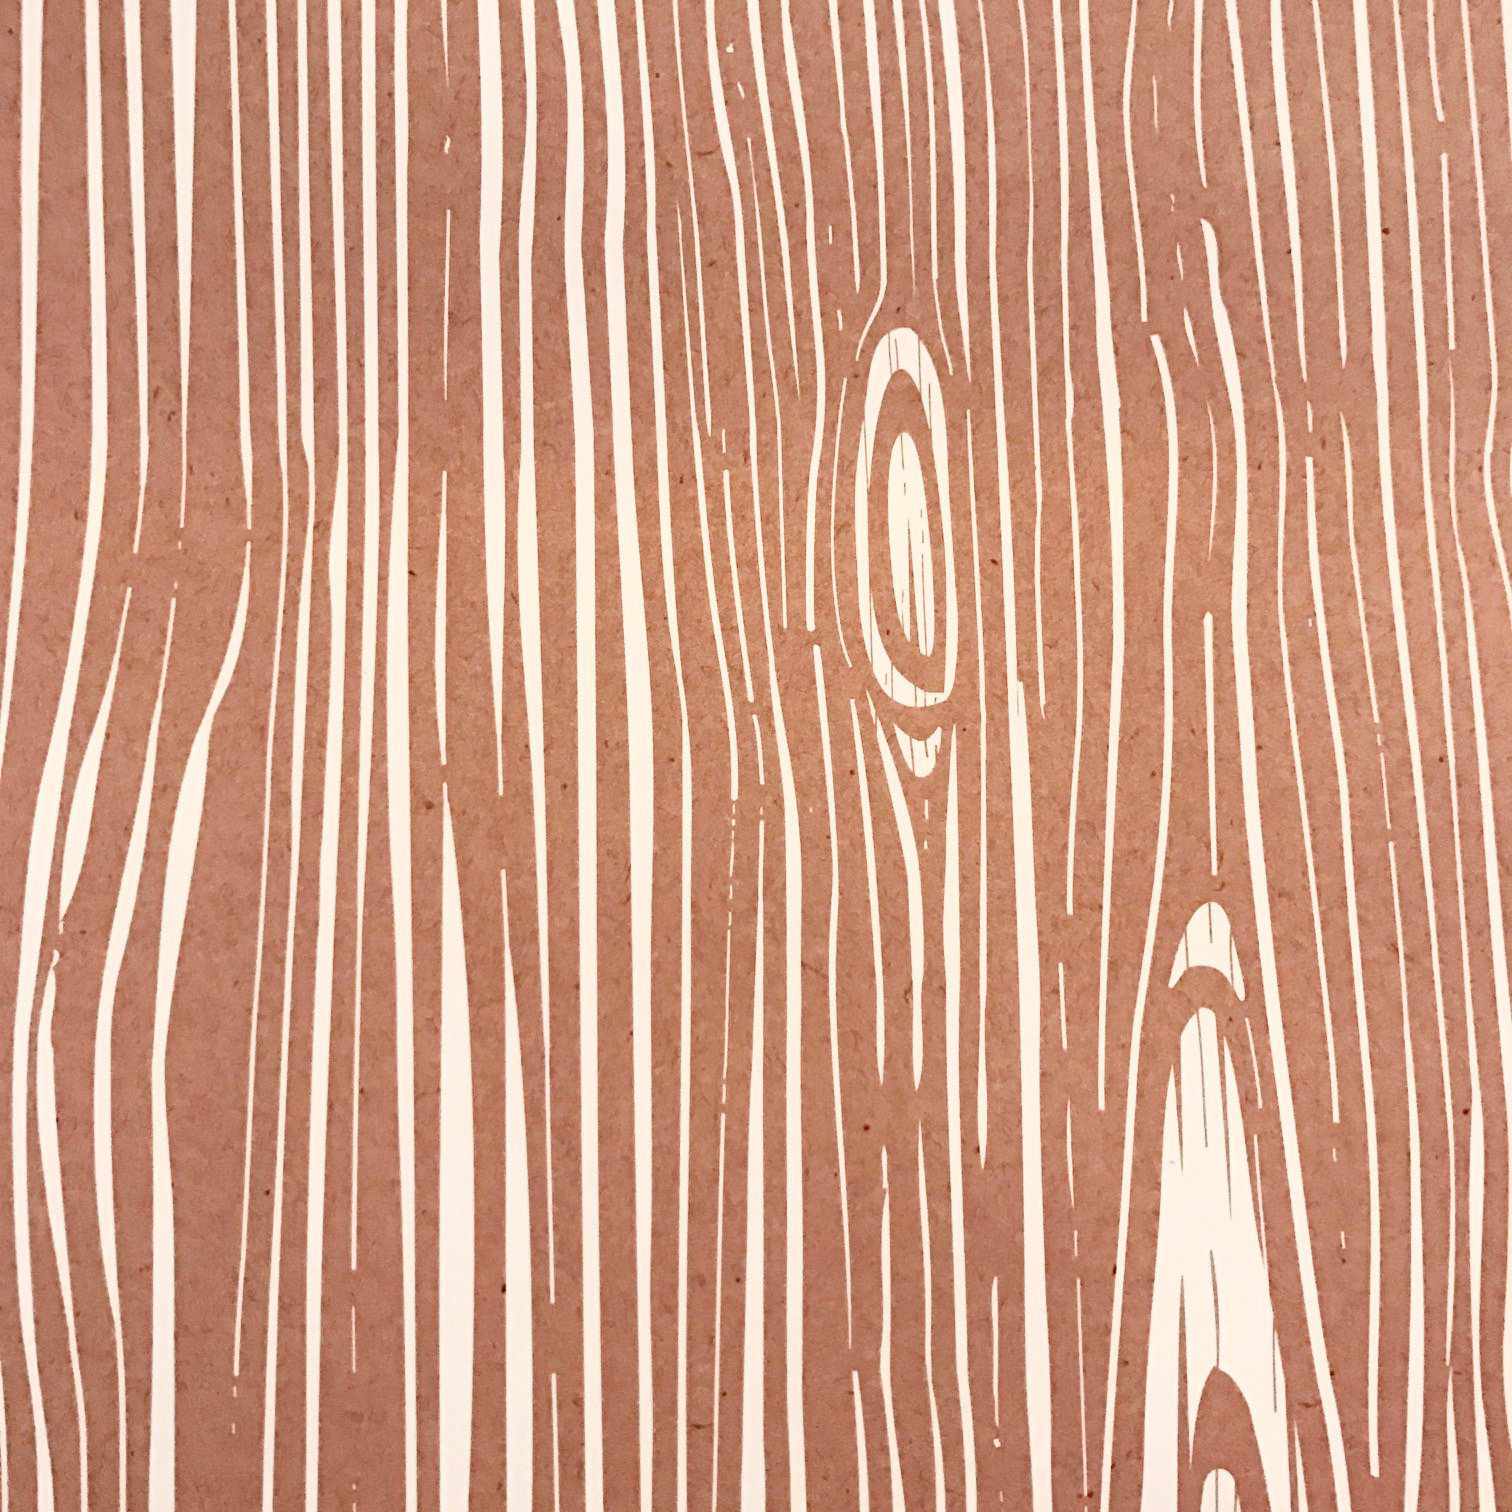 Egg Press Wrapping Paper Wood Grain Pattern Wrapping Paper